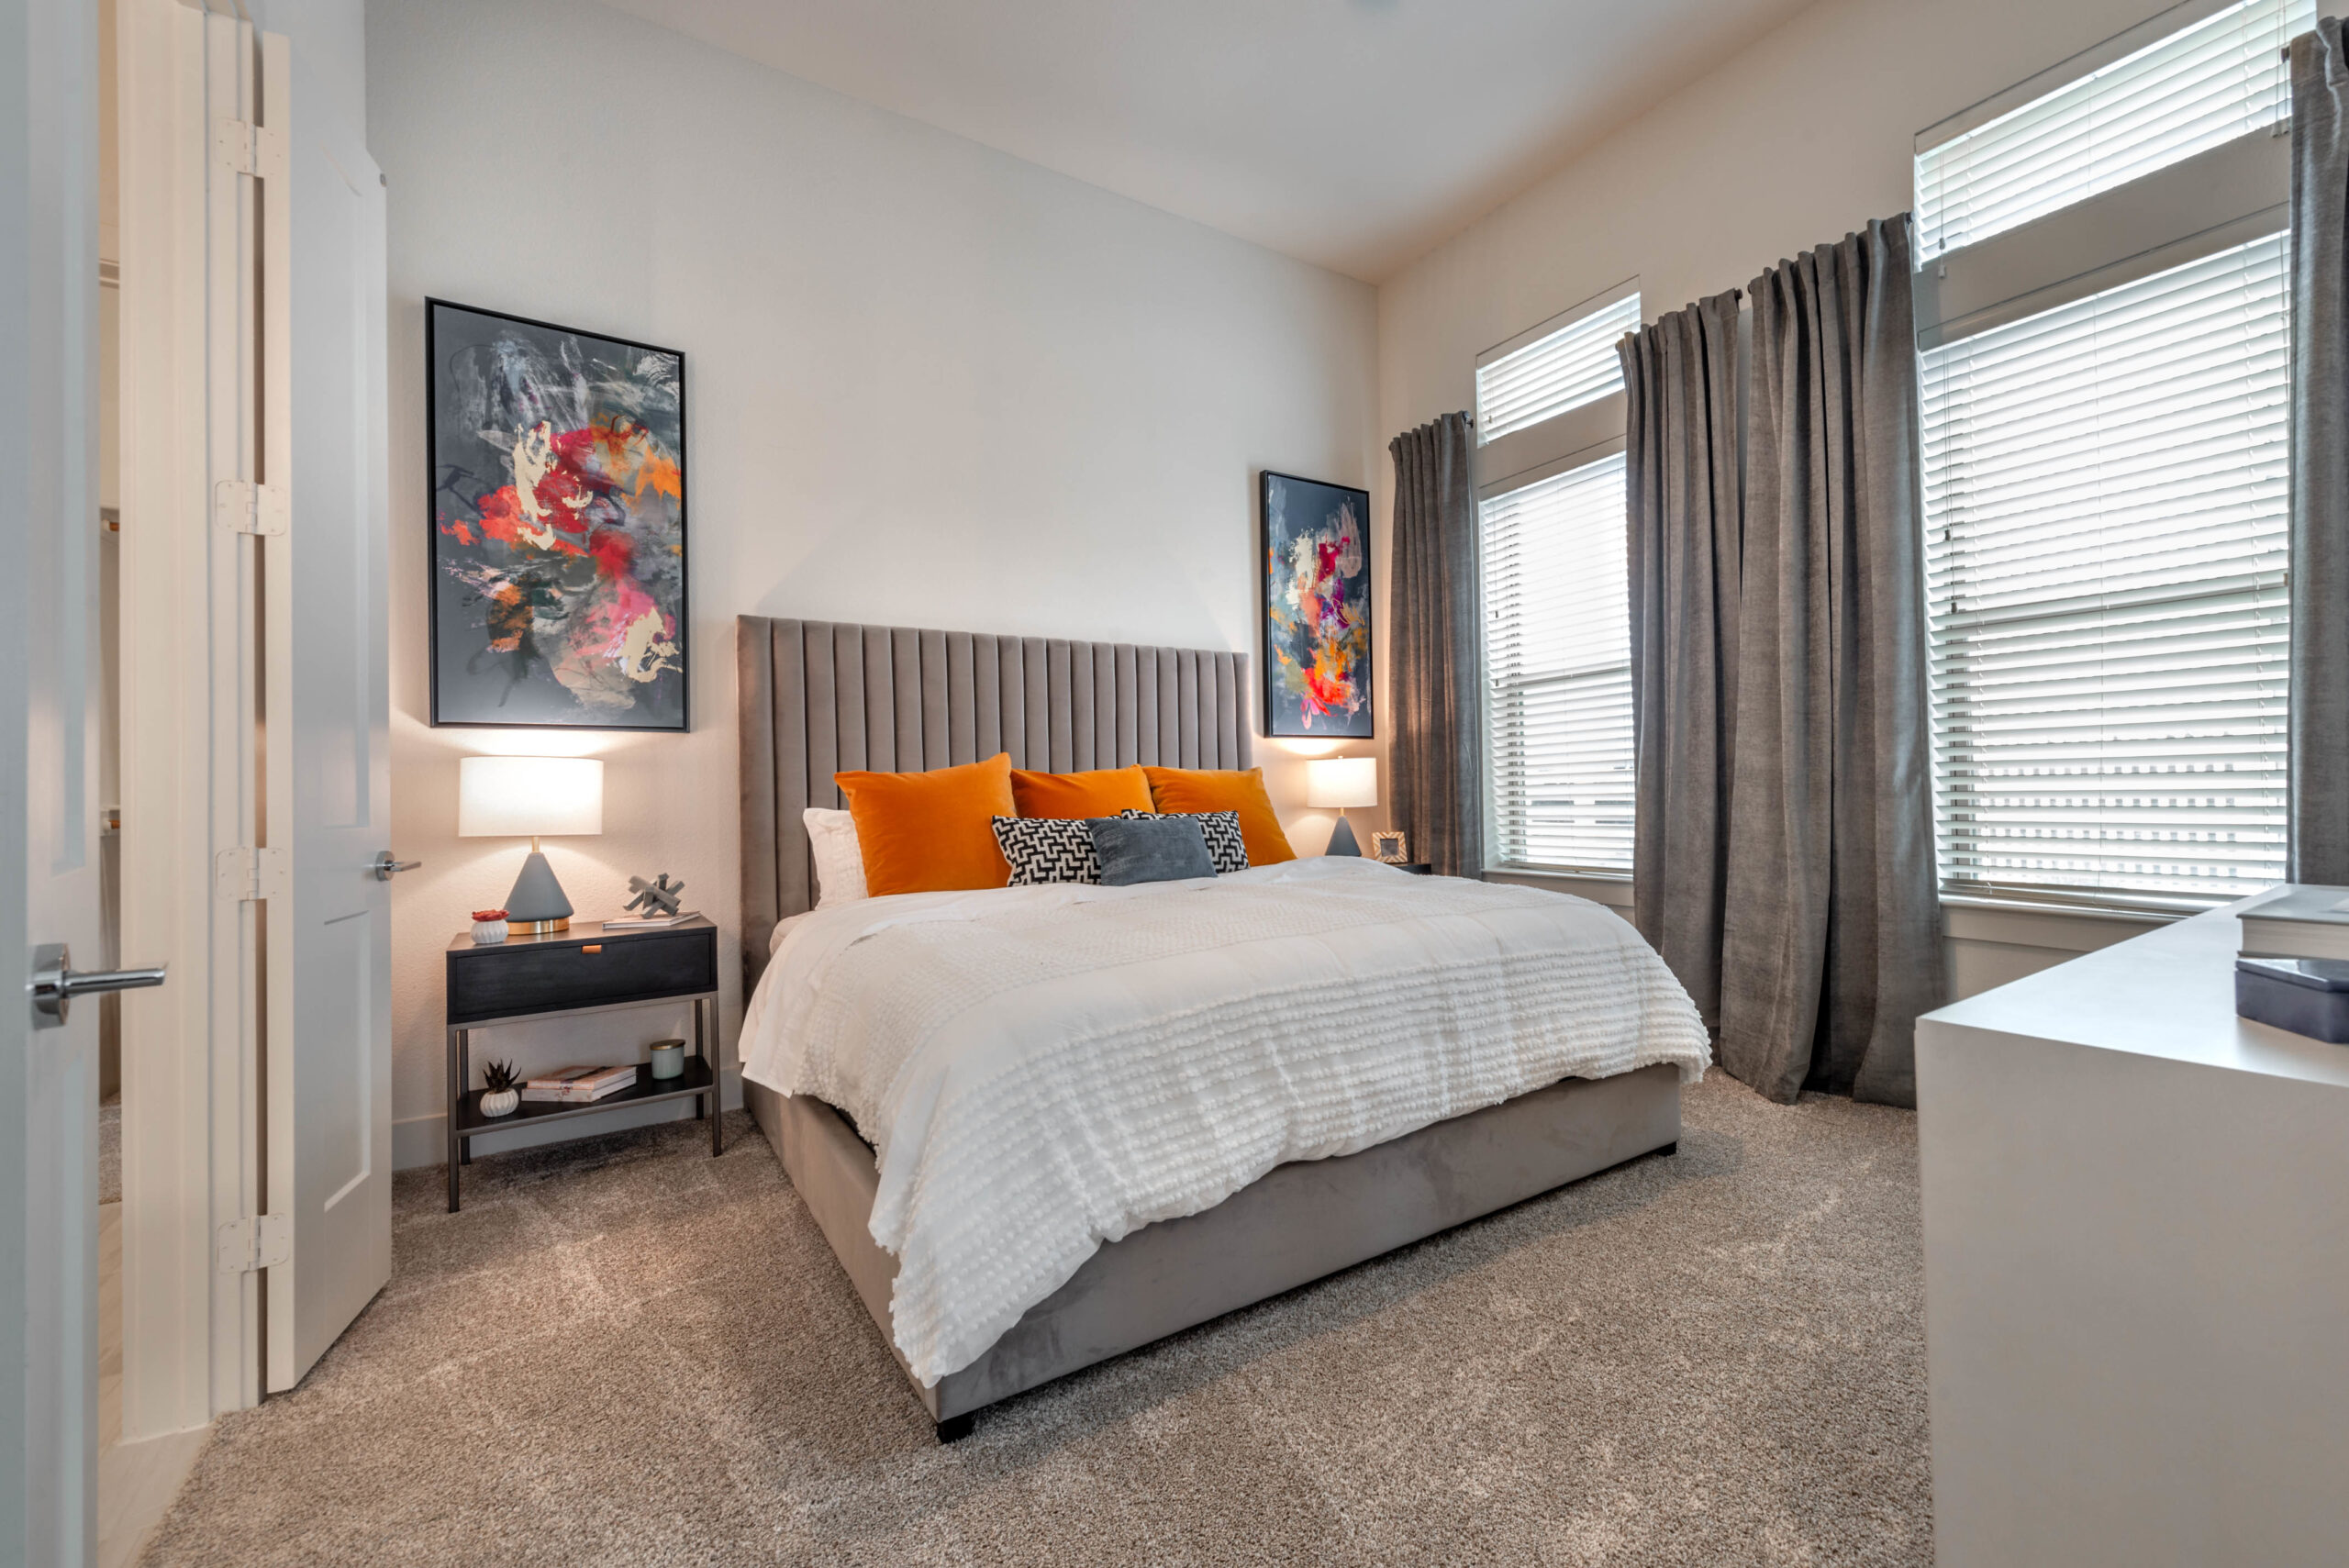 Model bedroom at our apartments in Fort Worth featuring colorful art, large windows, and a queen sized bed.